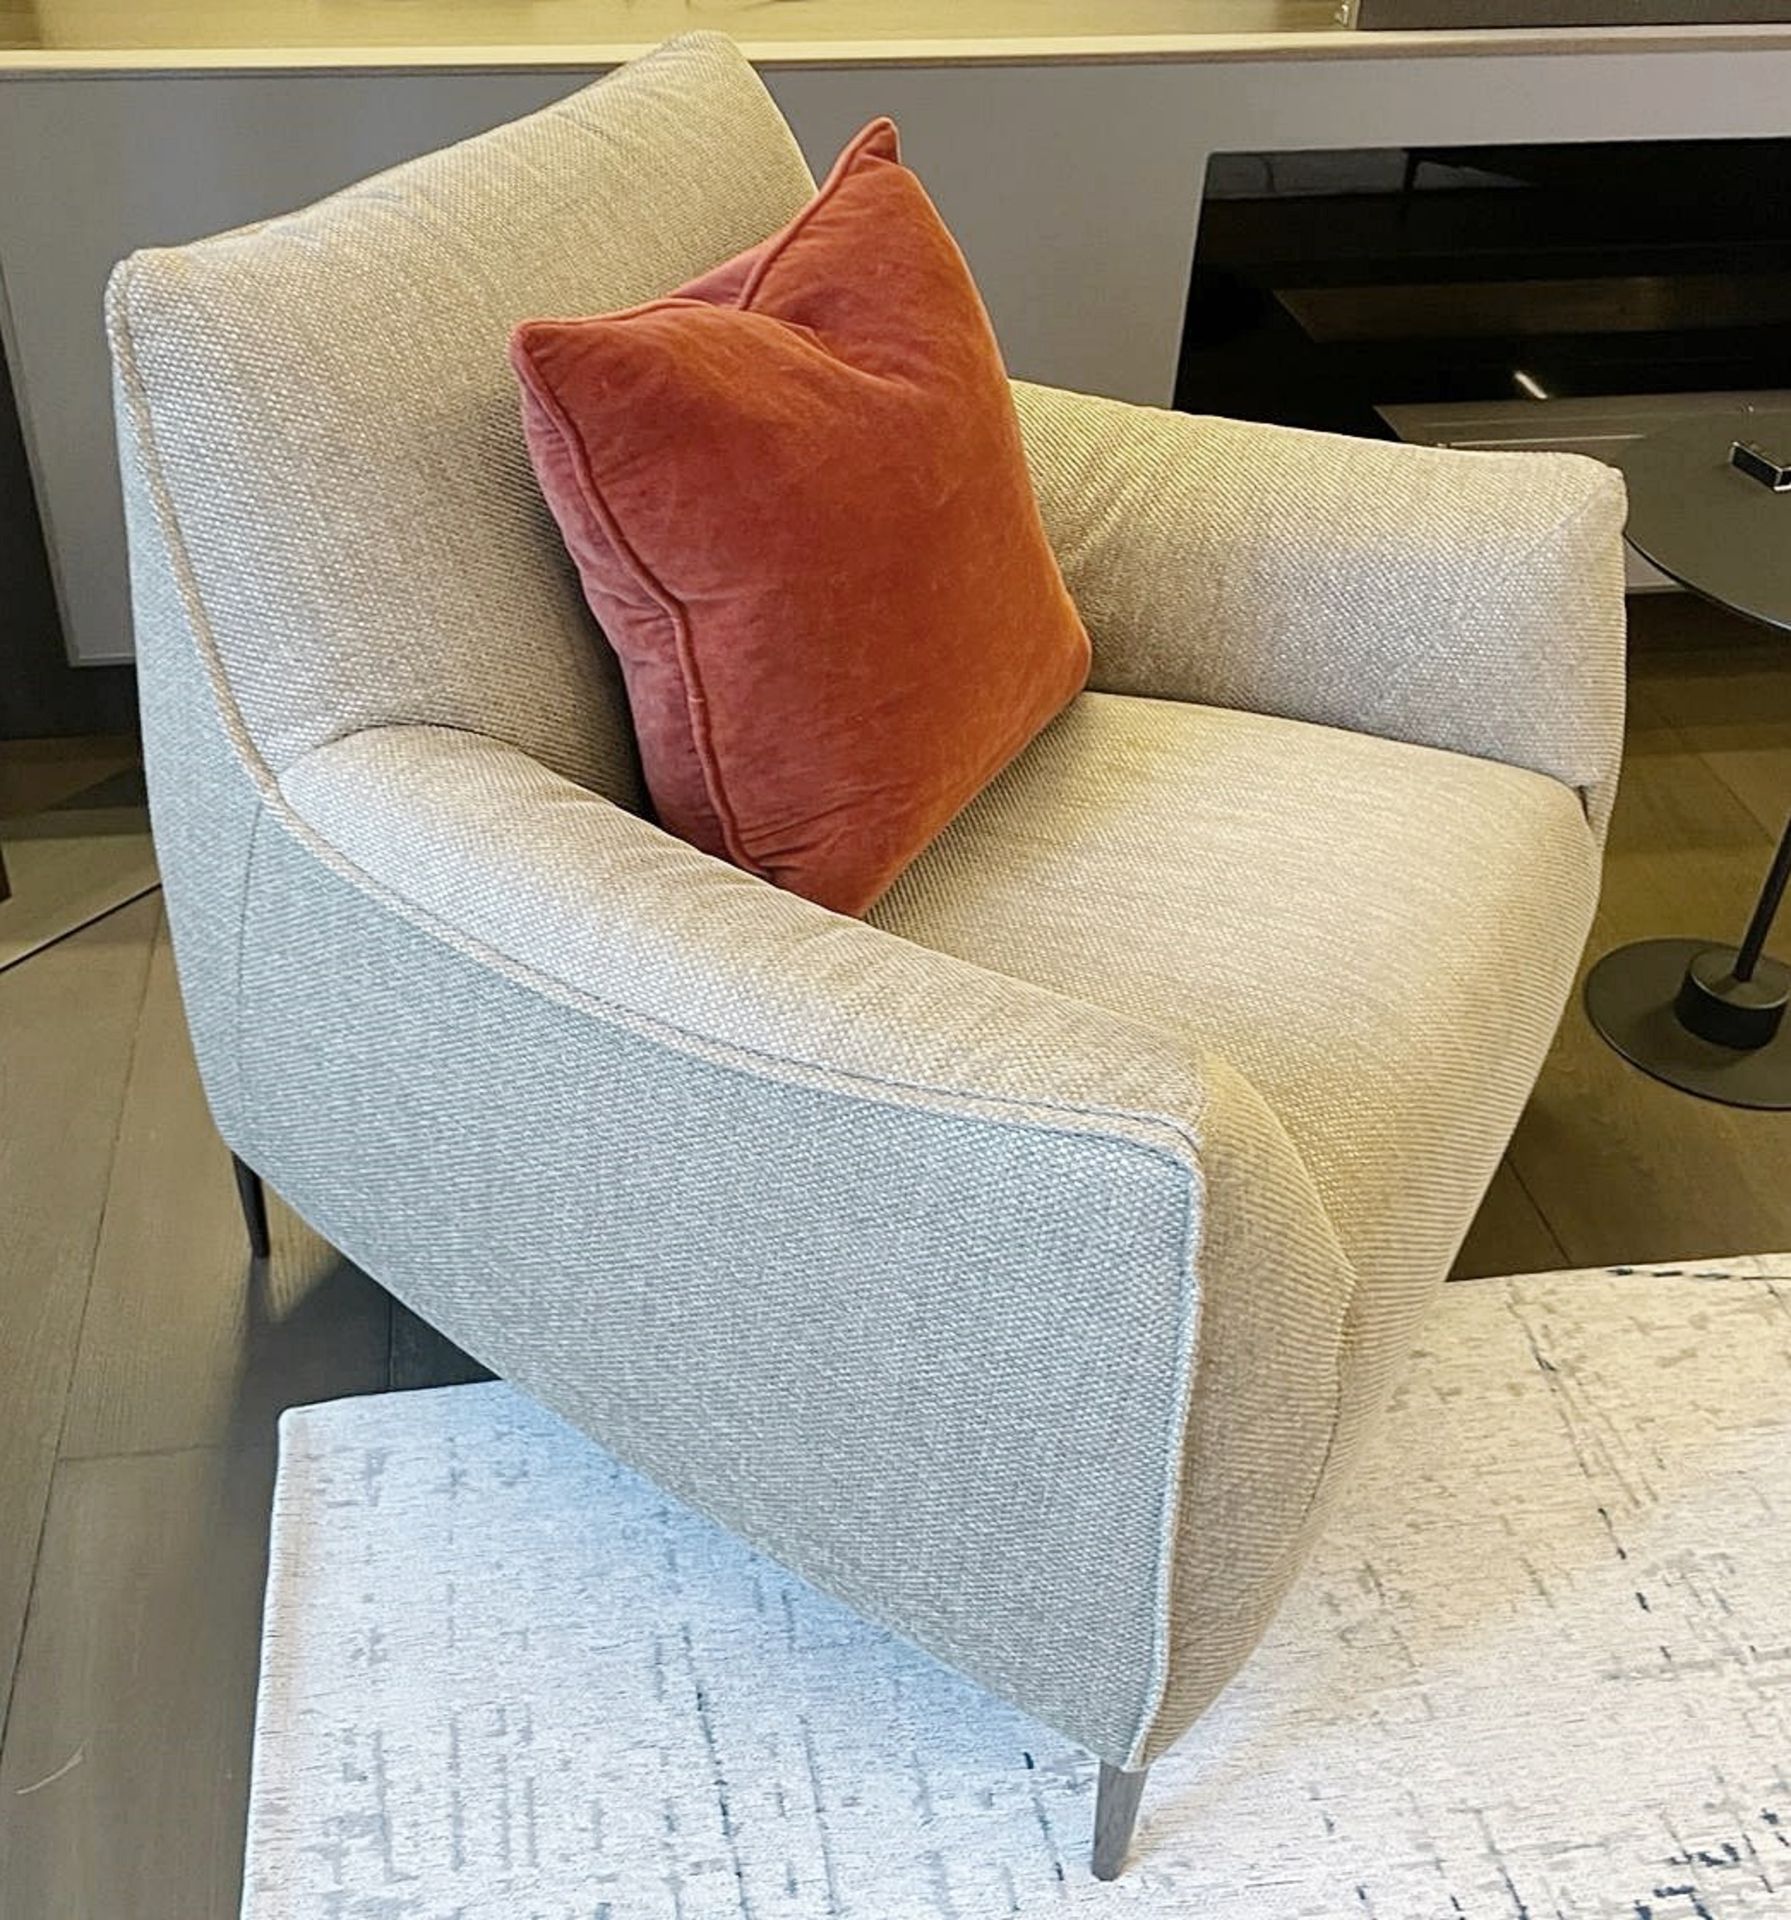 Pair of NATUZZI Luxury Armchairs Generously Upholstered in a Premium Woven Beige Fabric - Image 2 of 10